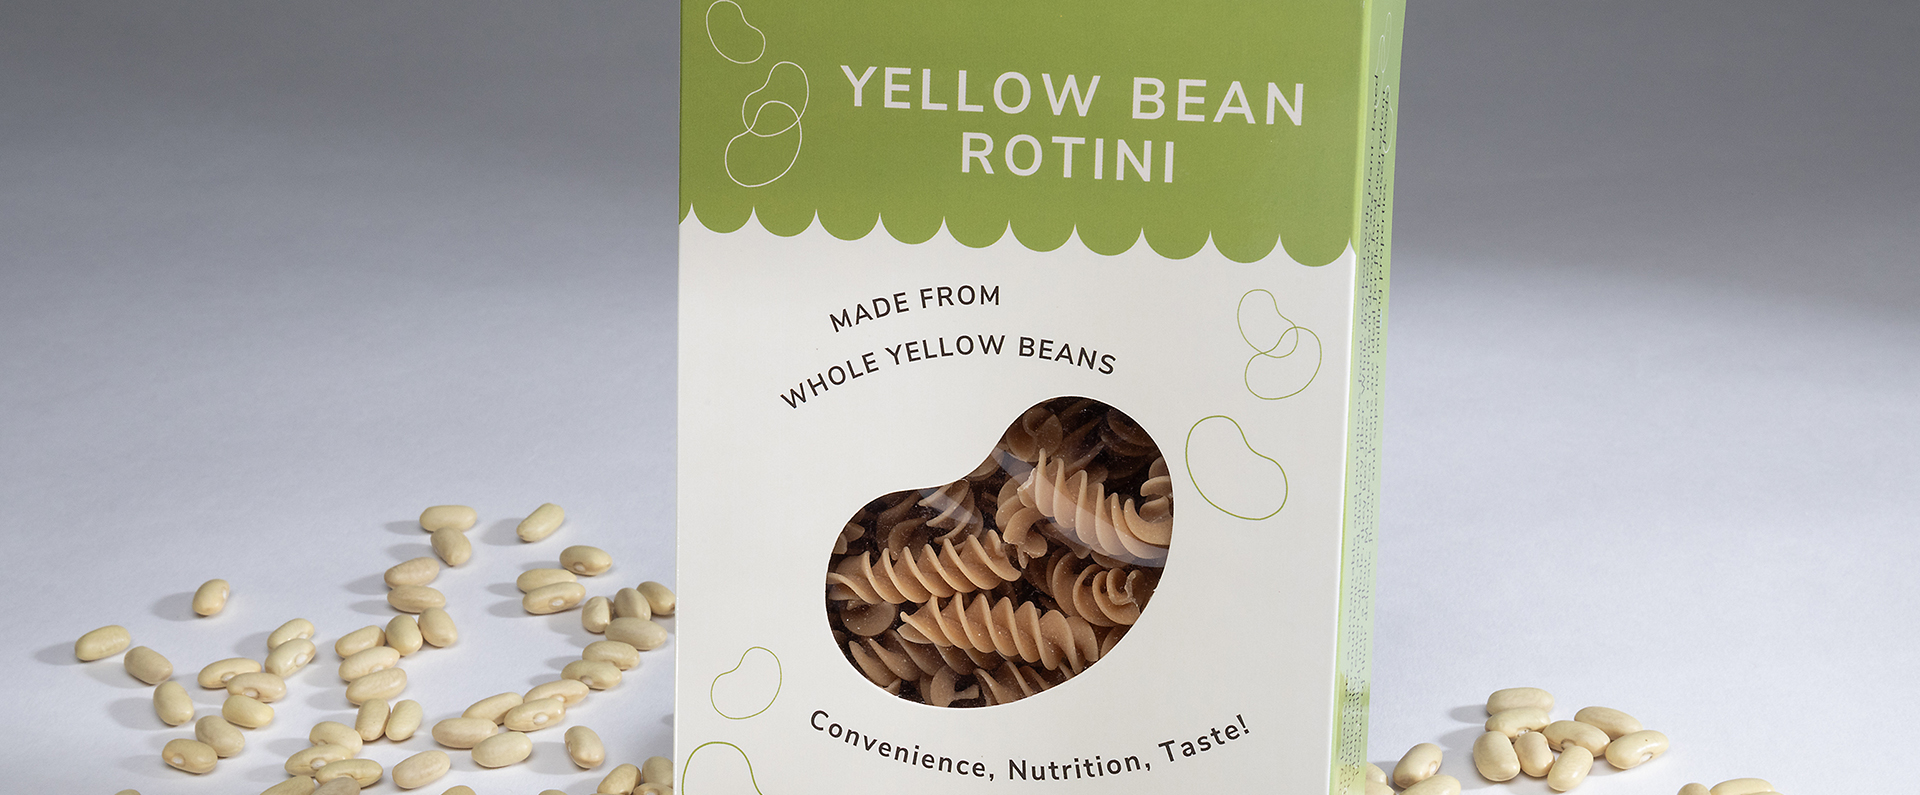 A box of rotini pasta made from yellow beans.